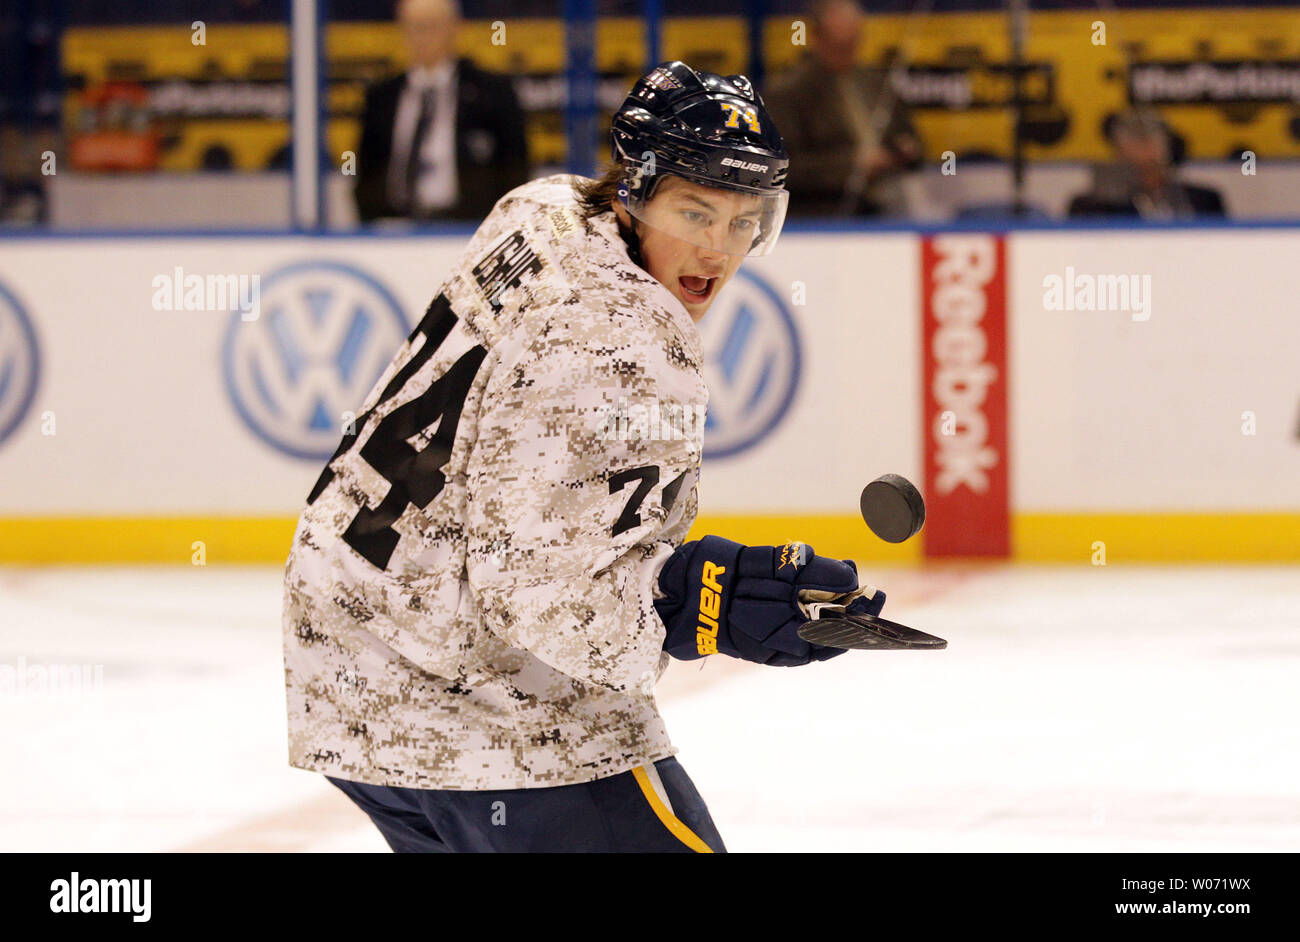 St. Louis Blues T.J. Oshie stretches during warmups, while wearing a  camouflage sweater before a game against the Toronto Maple Leafs in the  first period at the Scottrade Center in St. Louis on November 10, 2011. The  Blues wore the tops in honor of